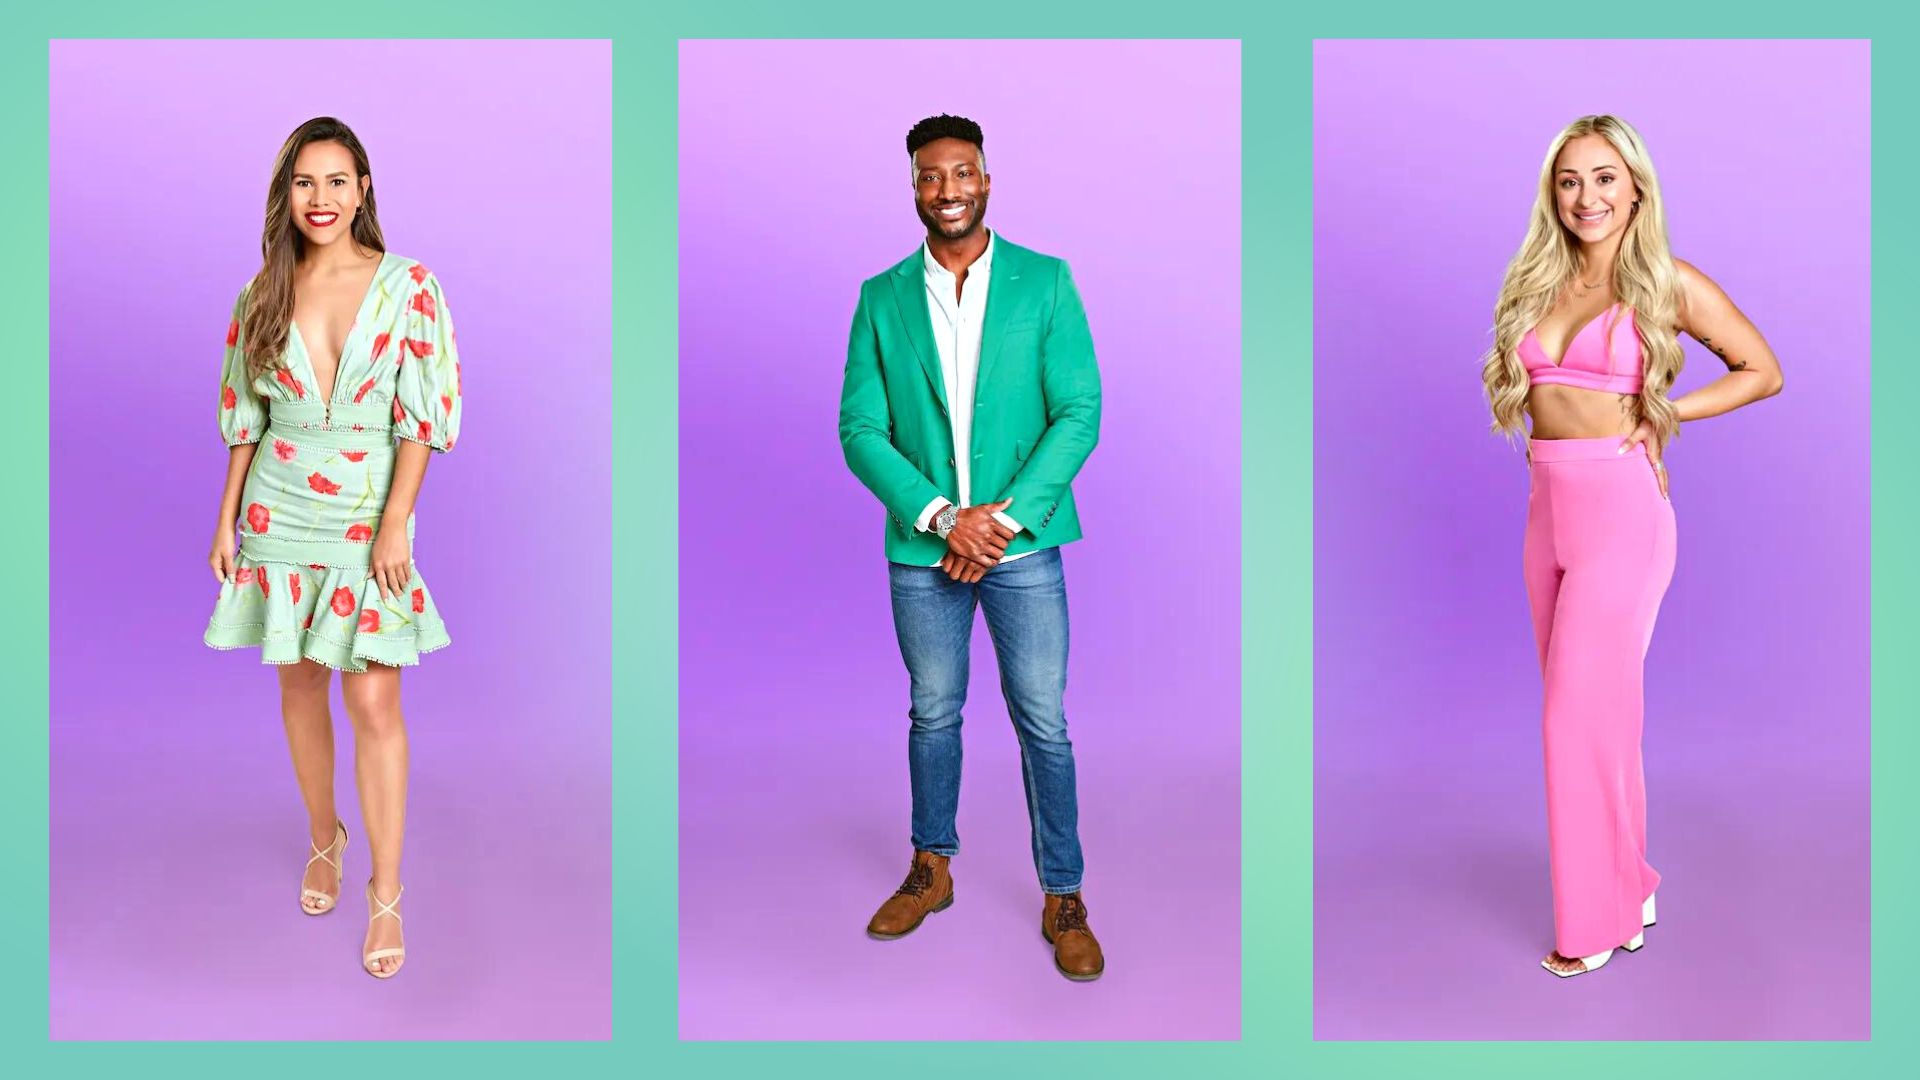 Love is Blind Season 5 Meet the Cast: Instagrams, Ages, and More